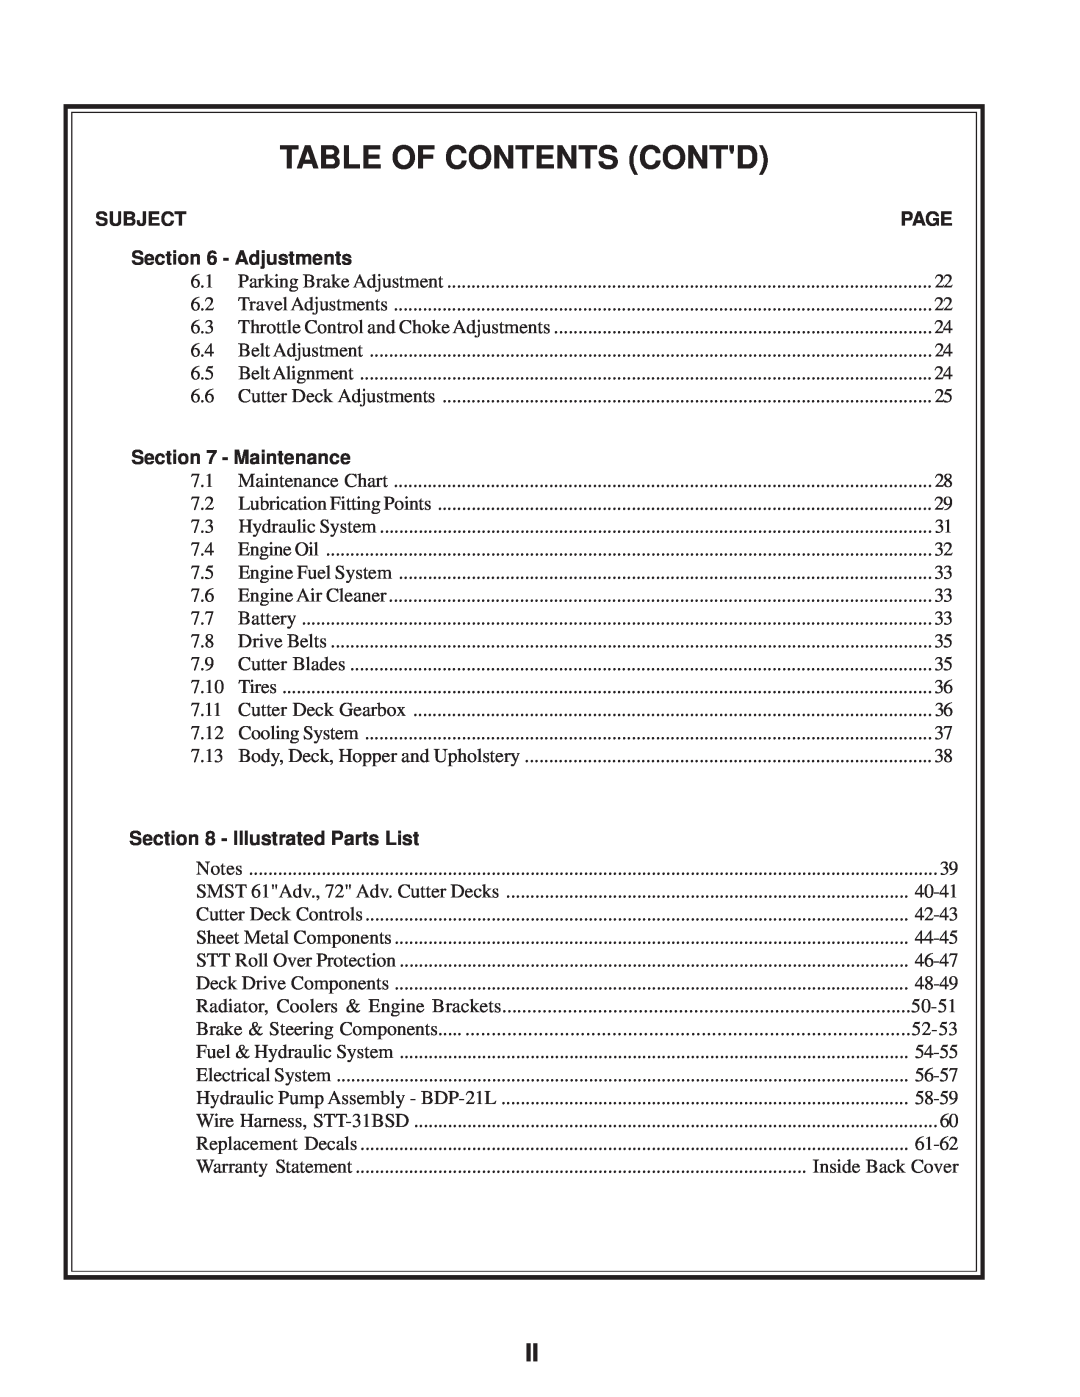 Scag Power Equipment STT-31BSD Table Of Contents Contd, Subject, Page, Adjustments, Maintenance, Illustrated Parts List 